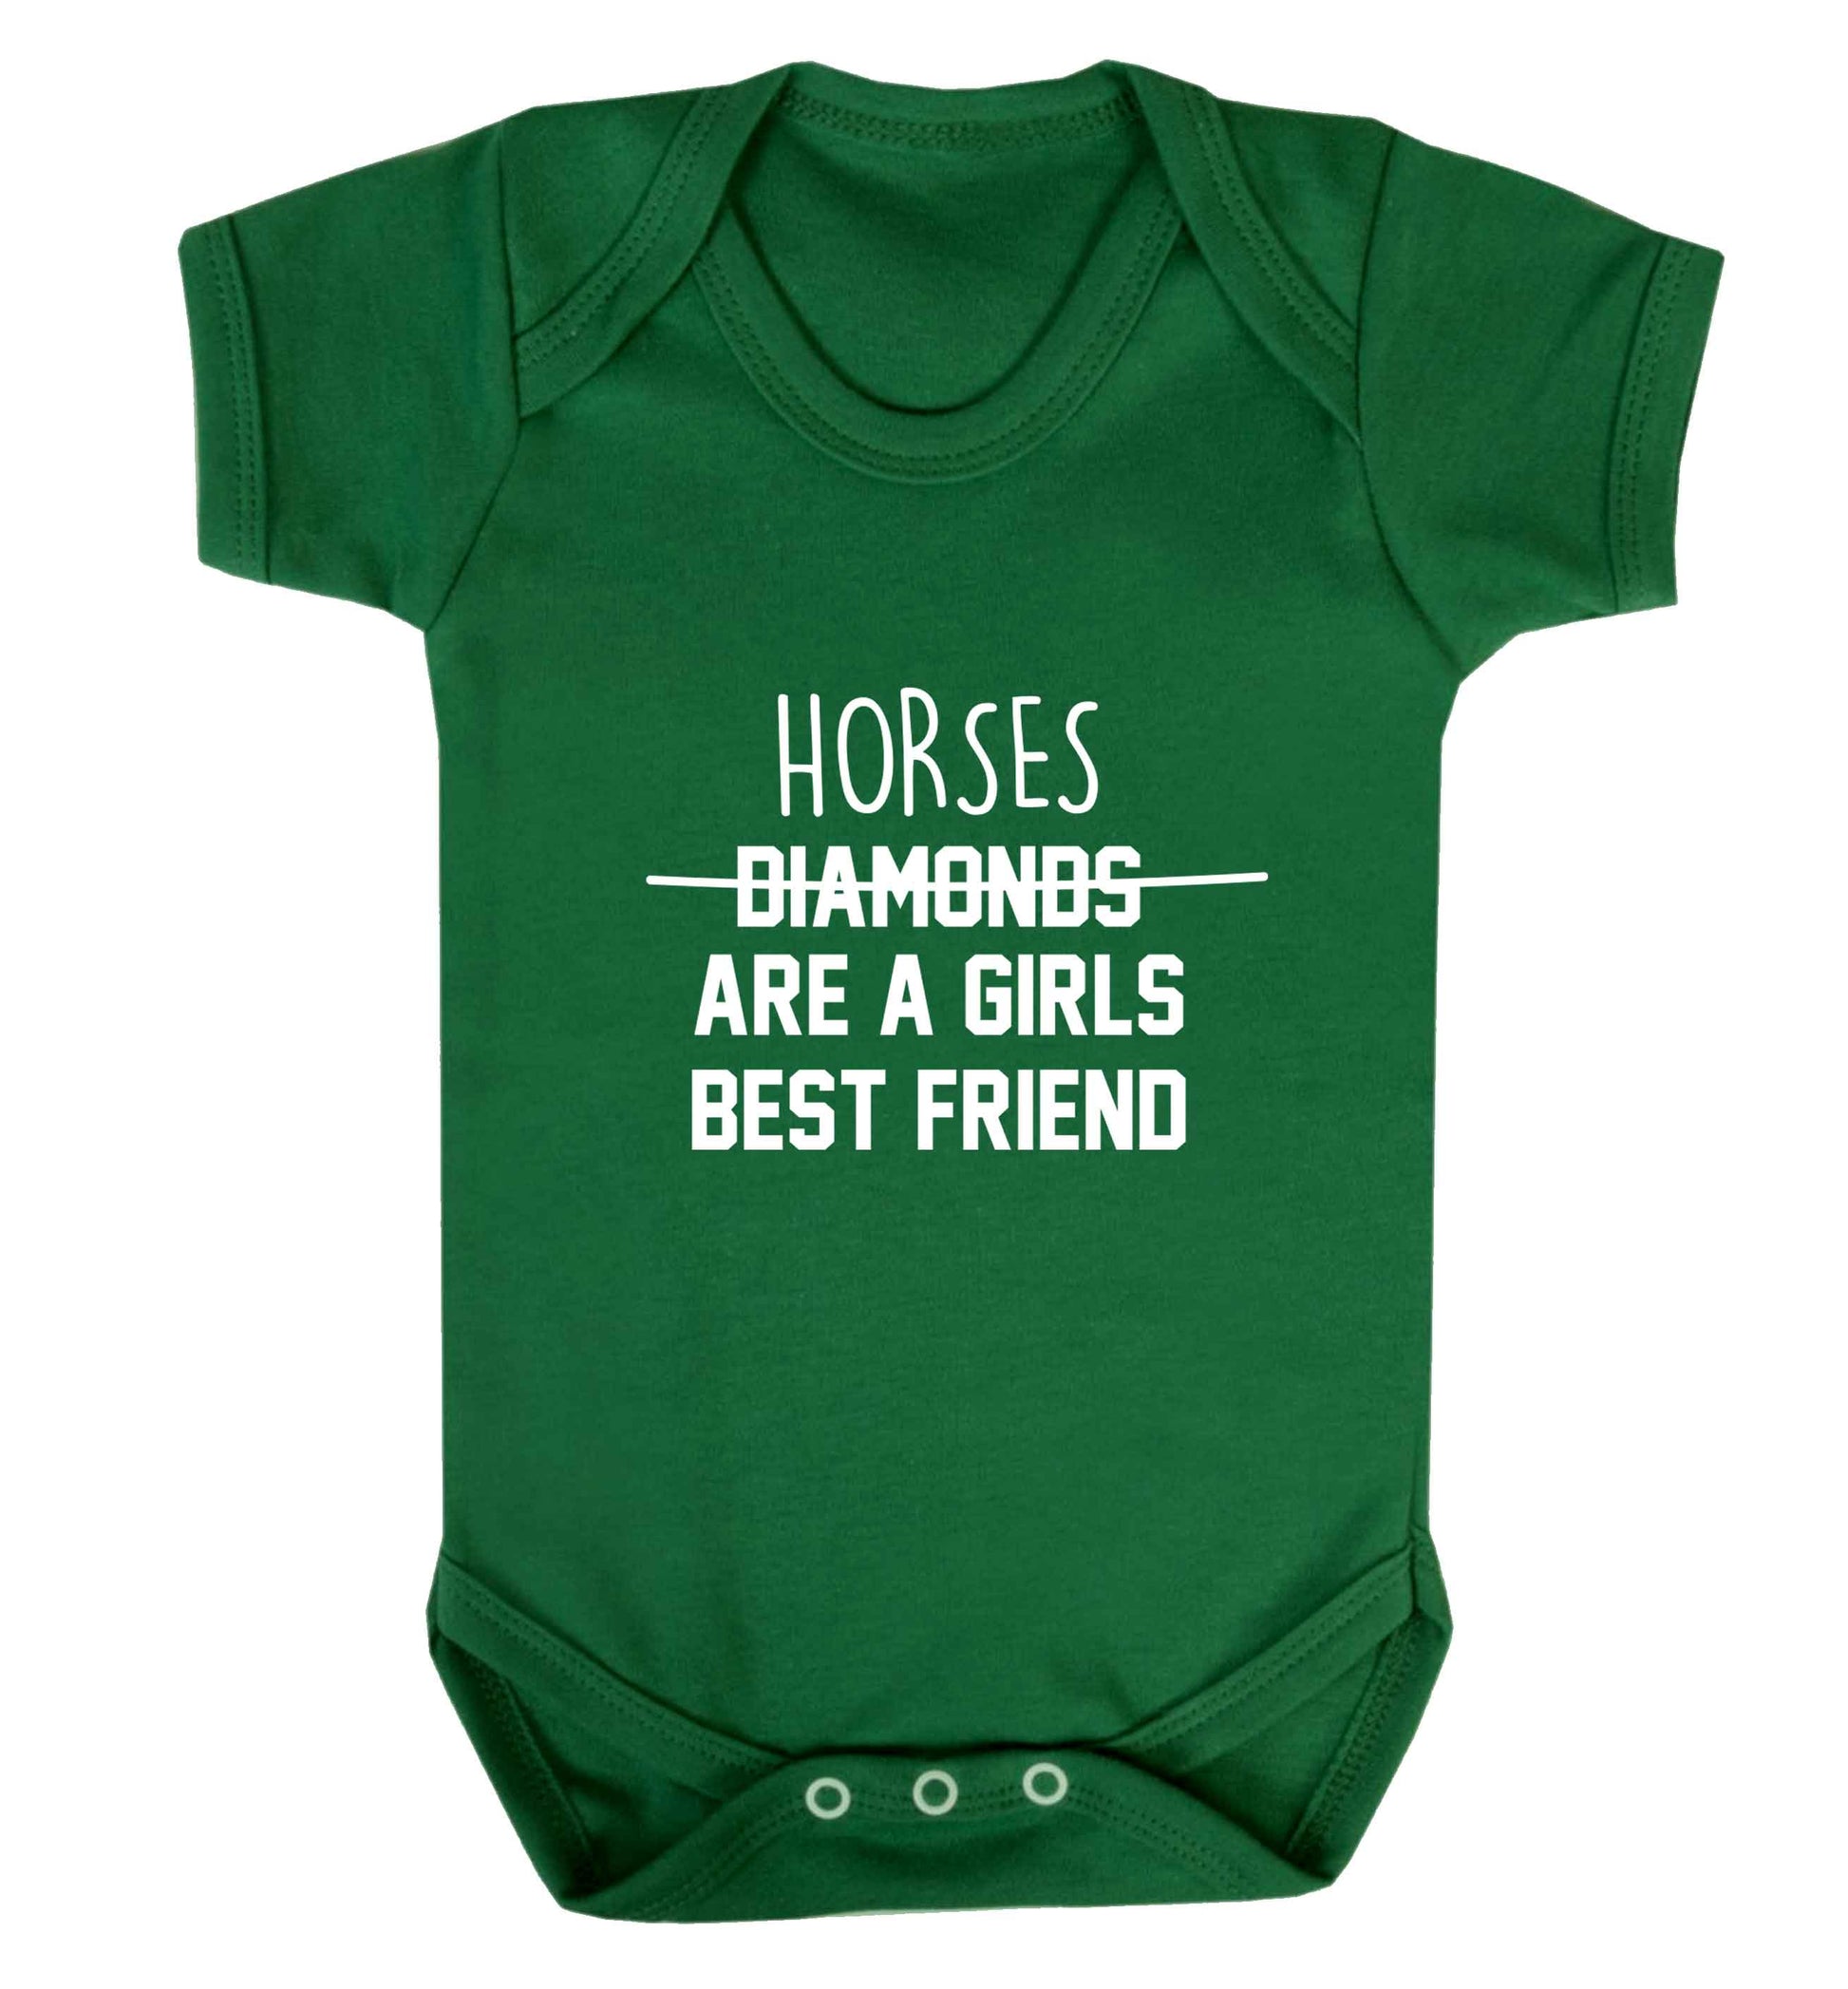 Horses are a girls best friend baby vest green 18-24 months